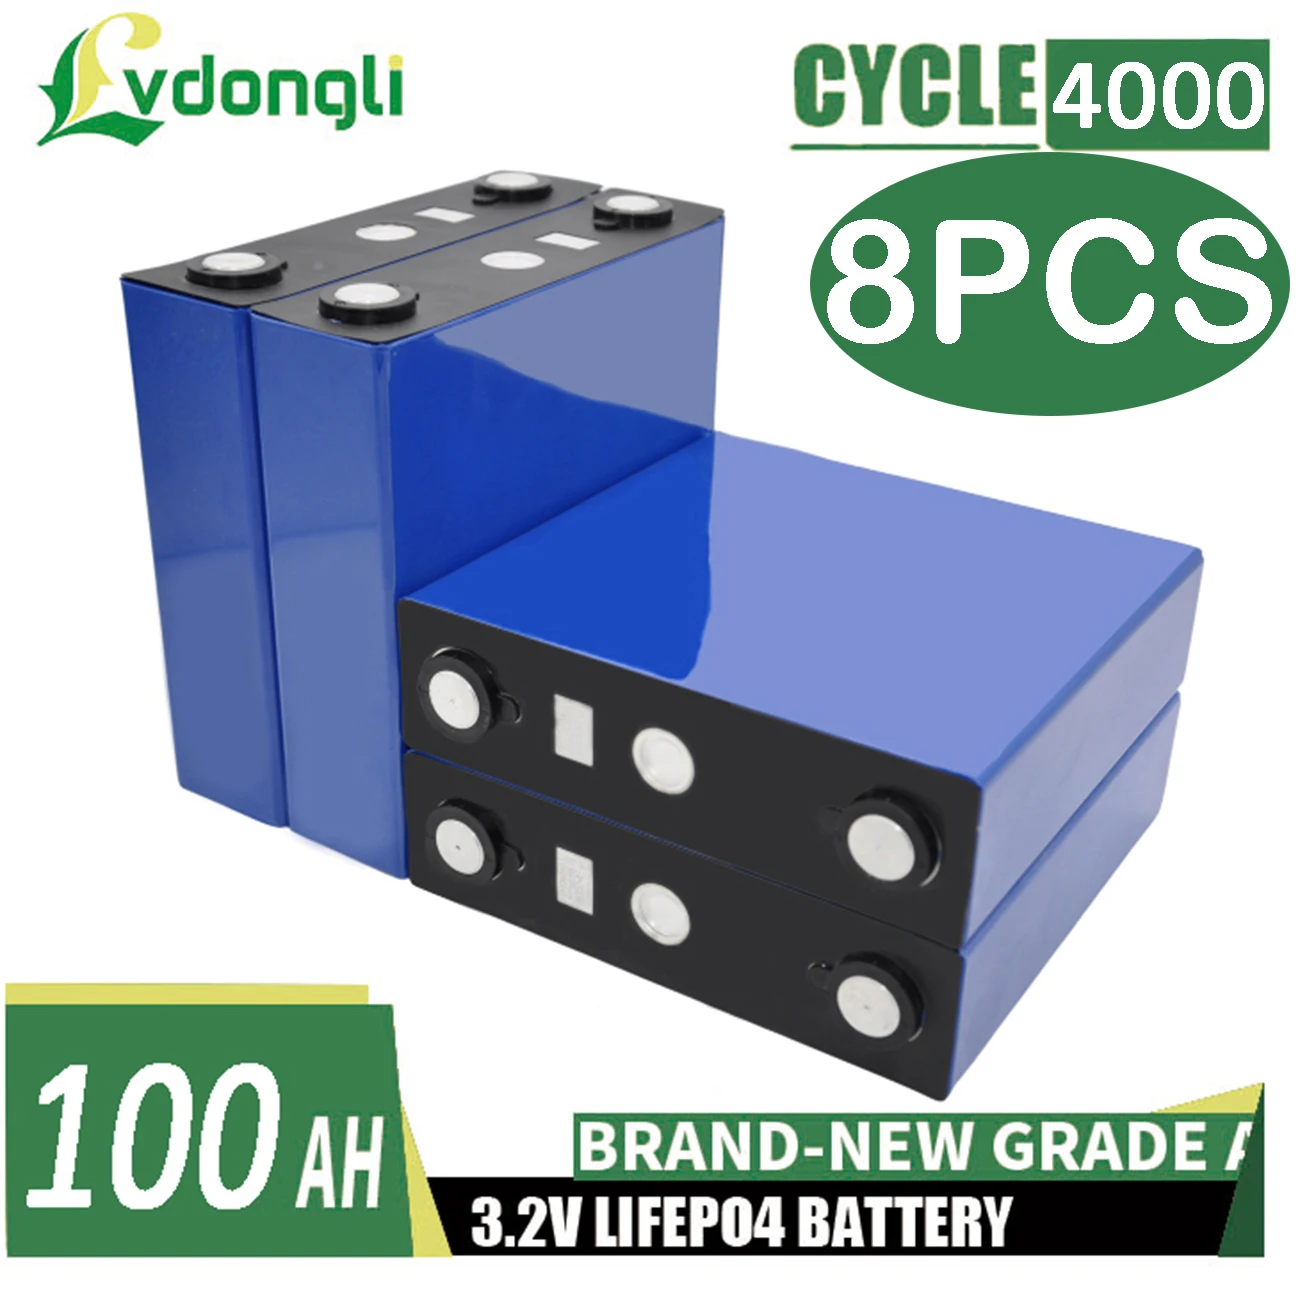 

AC 3.2V 100Ah Lifepo4 Battery Rechargeable Lithium Iron Phosphate for Boat Golf Cart RV EV Forklift